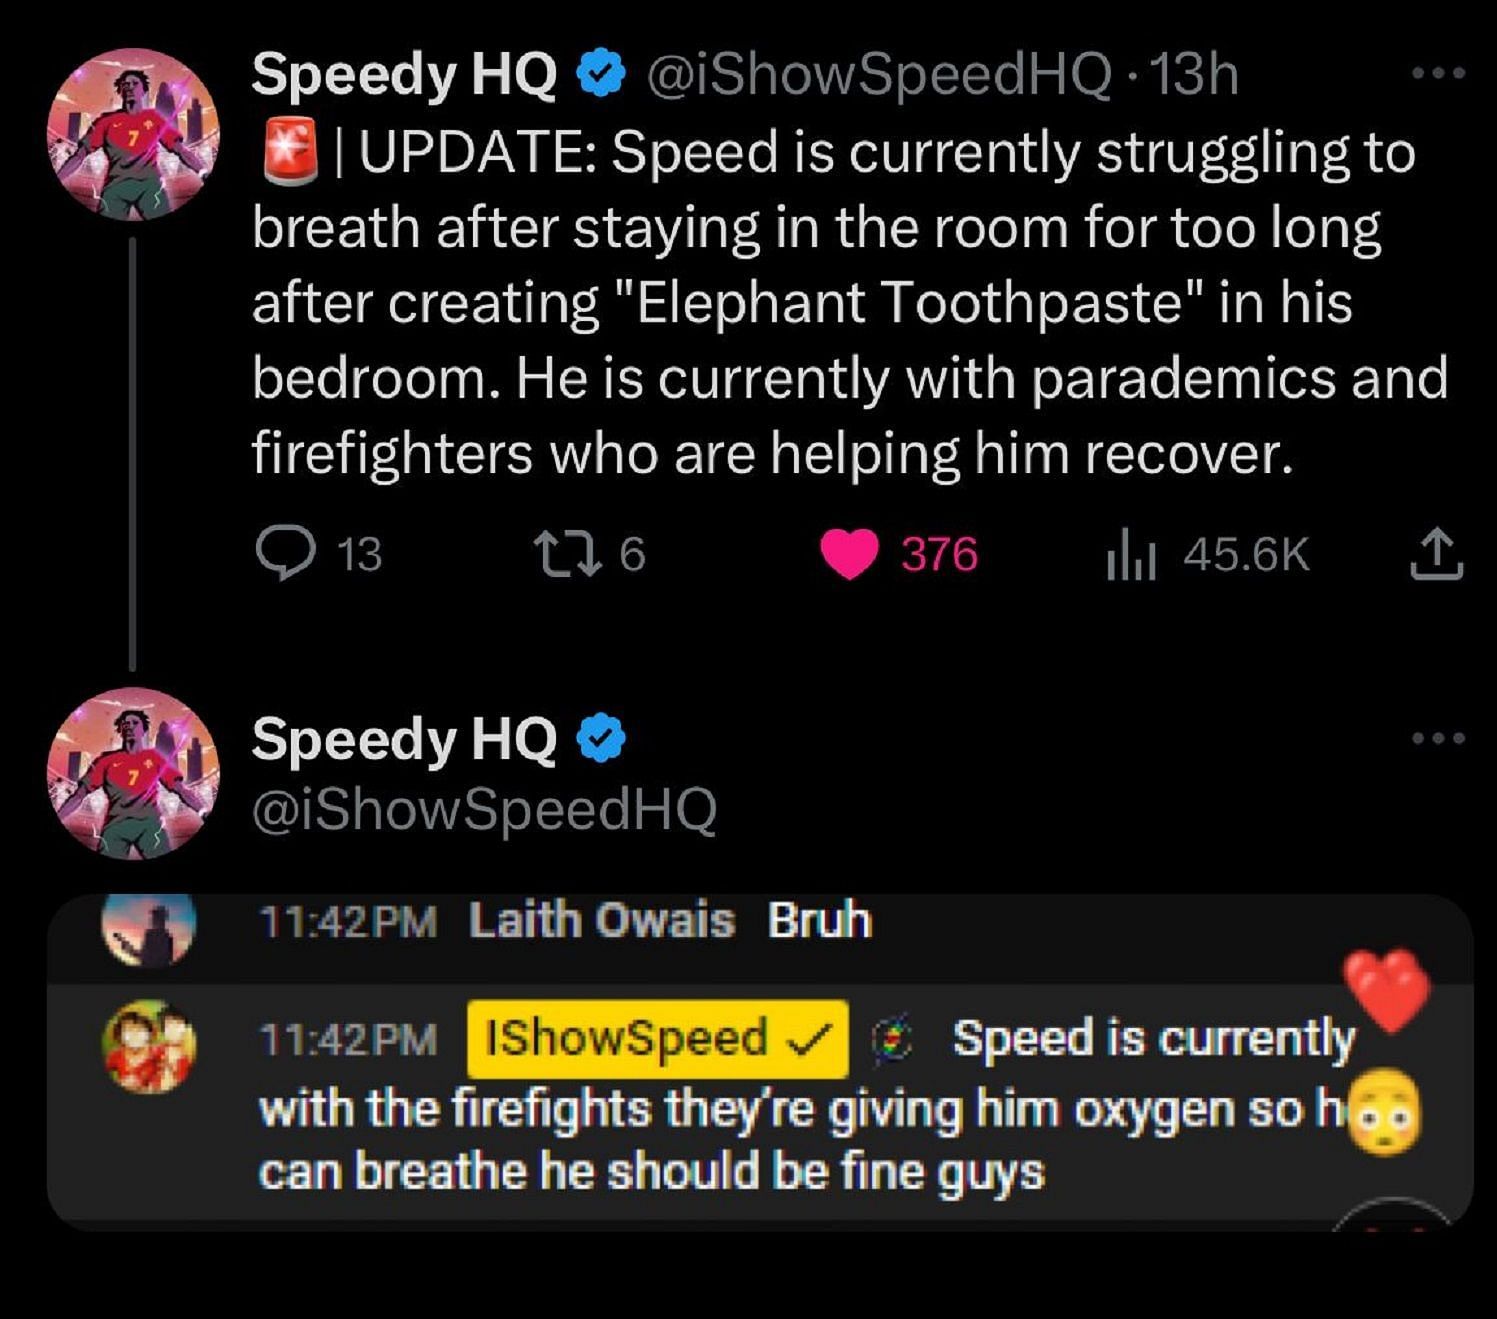 Speed didn't die - IShowSpeed out of hospital after severe sinus